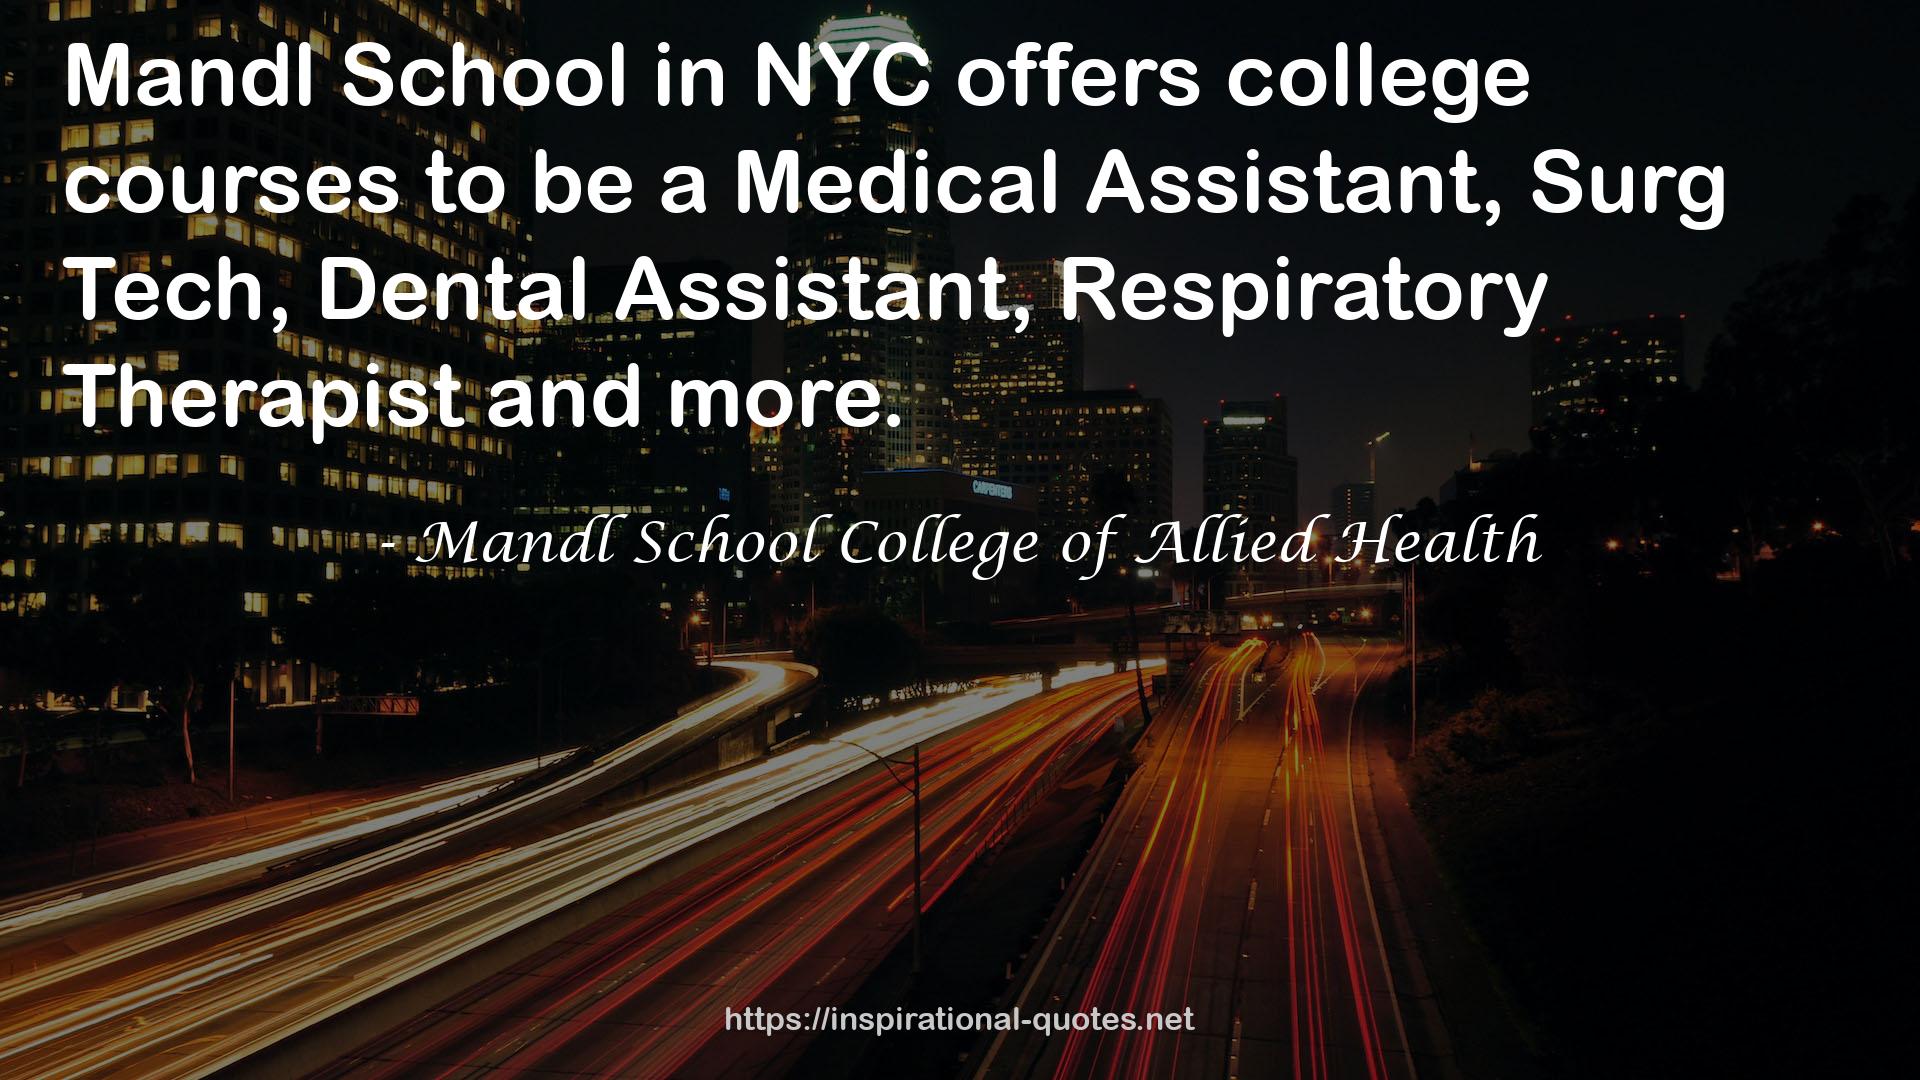 Mandl School College of Allied Health QUOTES